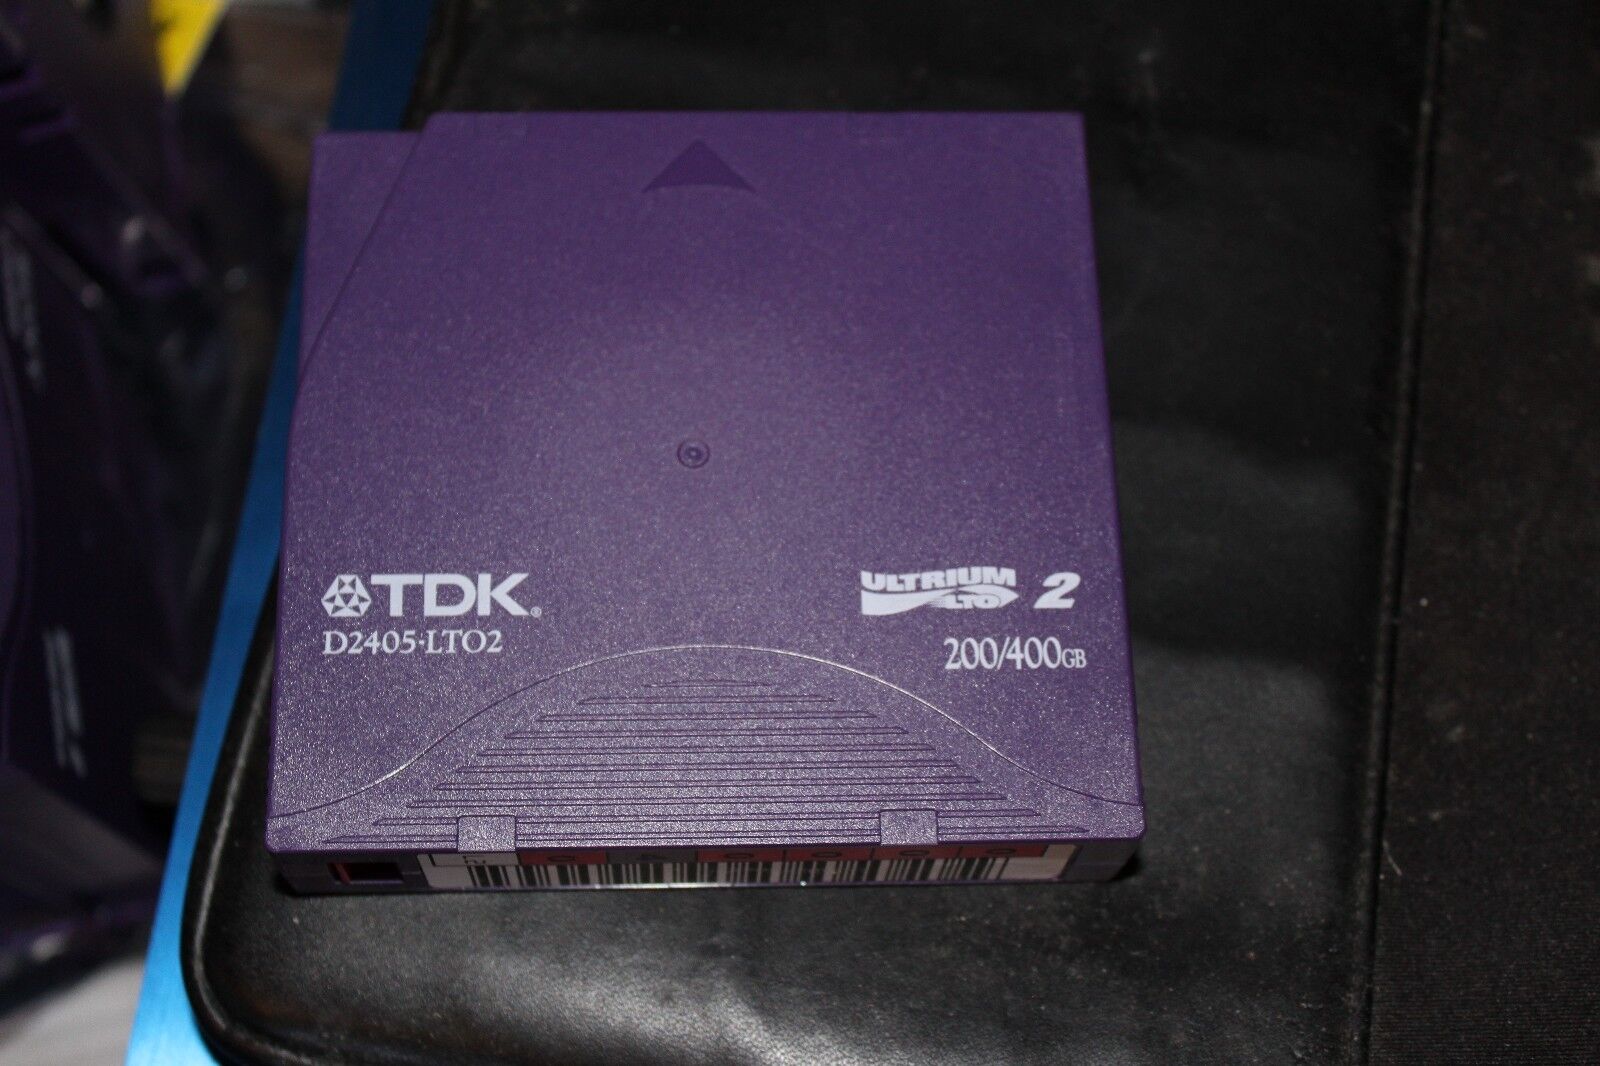 (Lot of 5) TDK D2405-LTO2 LTO Ultrium 2 Data Cartridge 200/400GB with Barcode TDK Does not apply